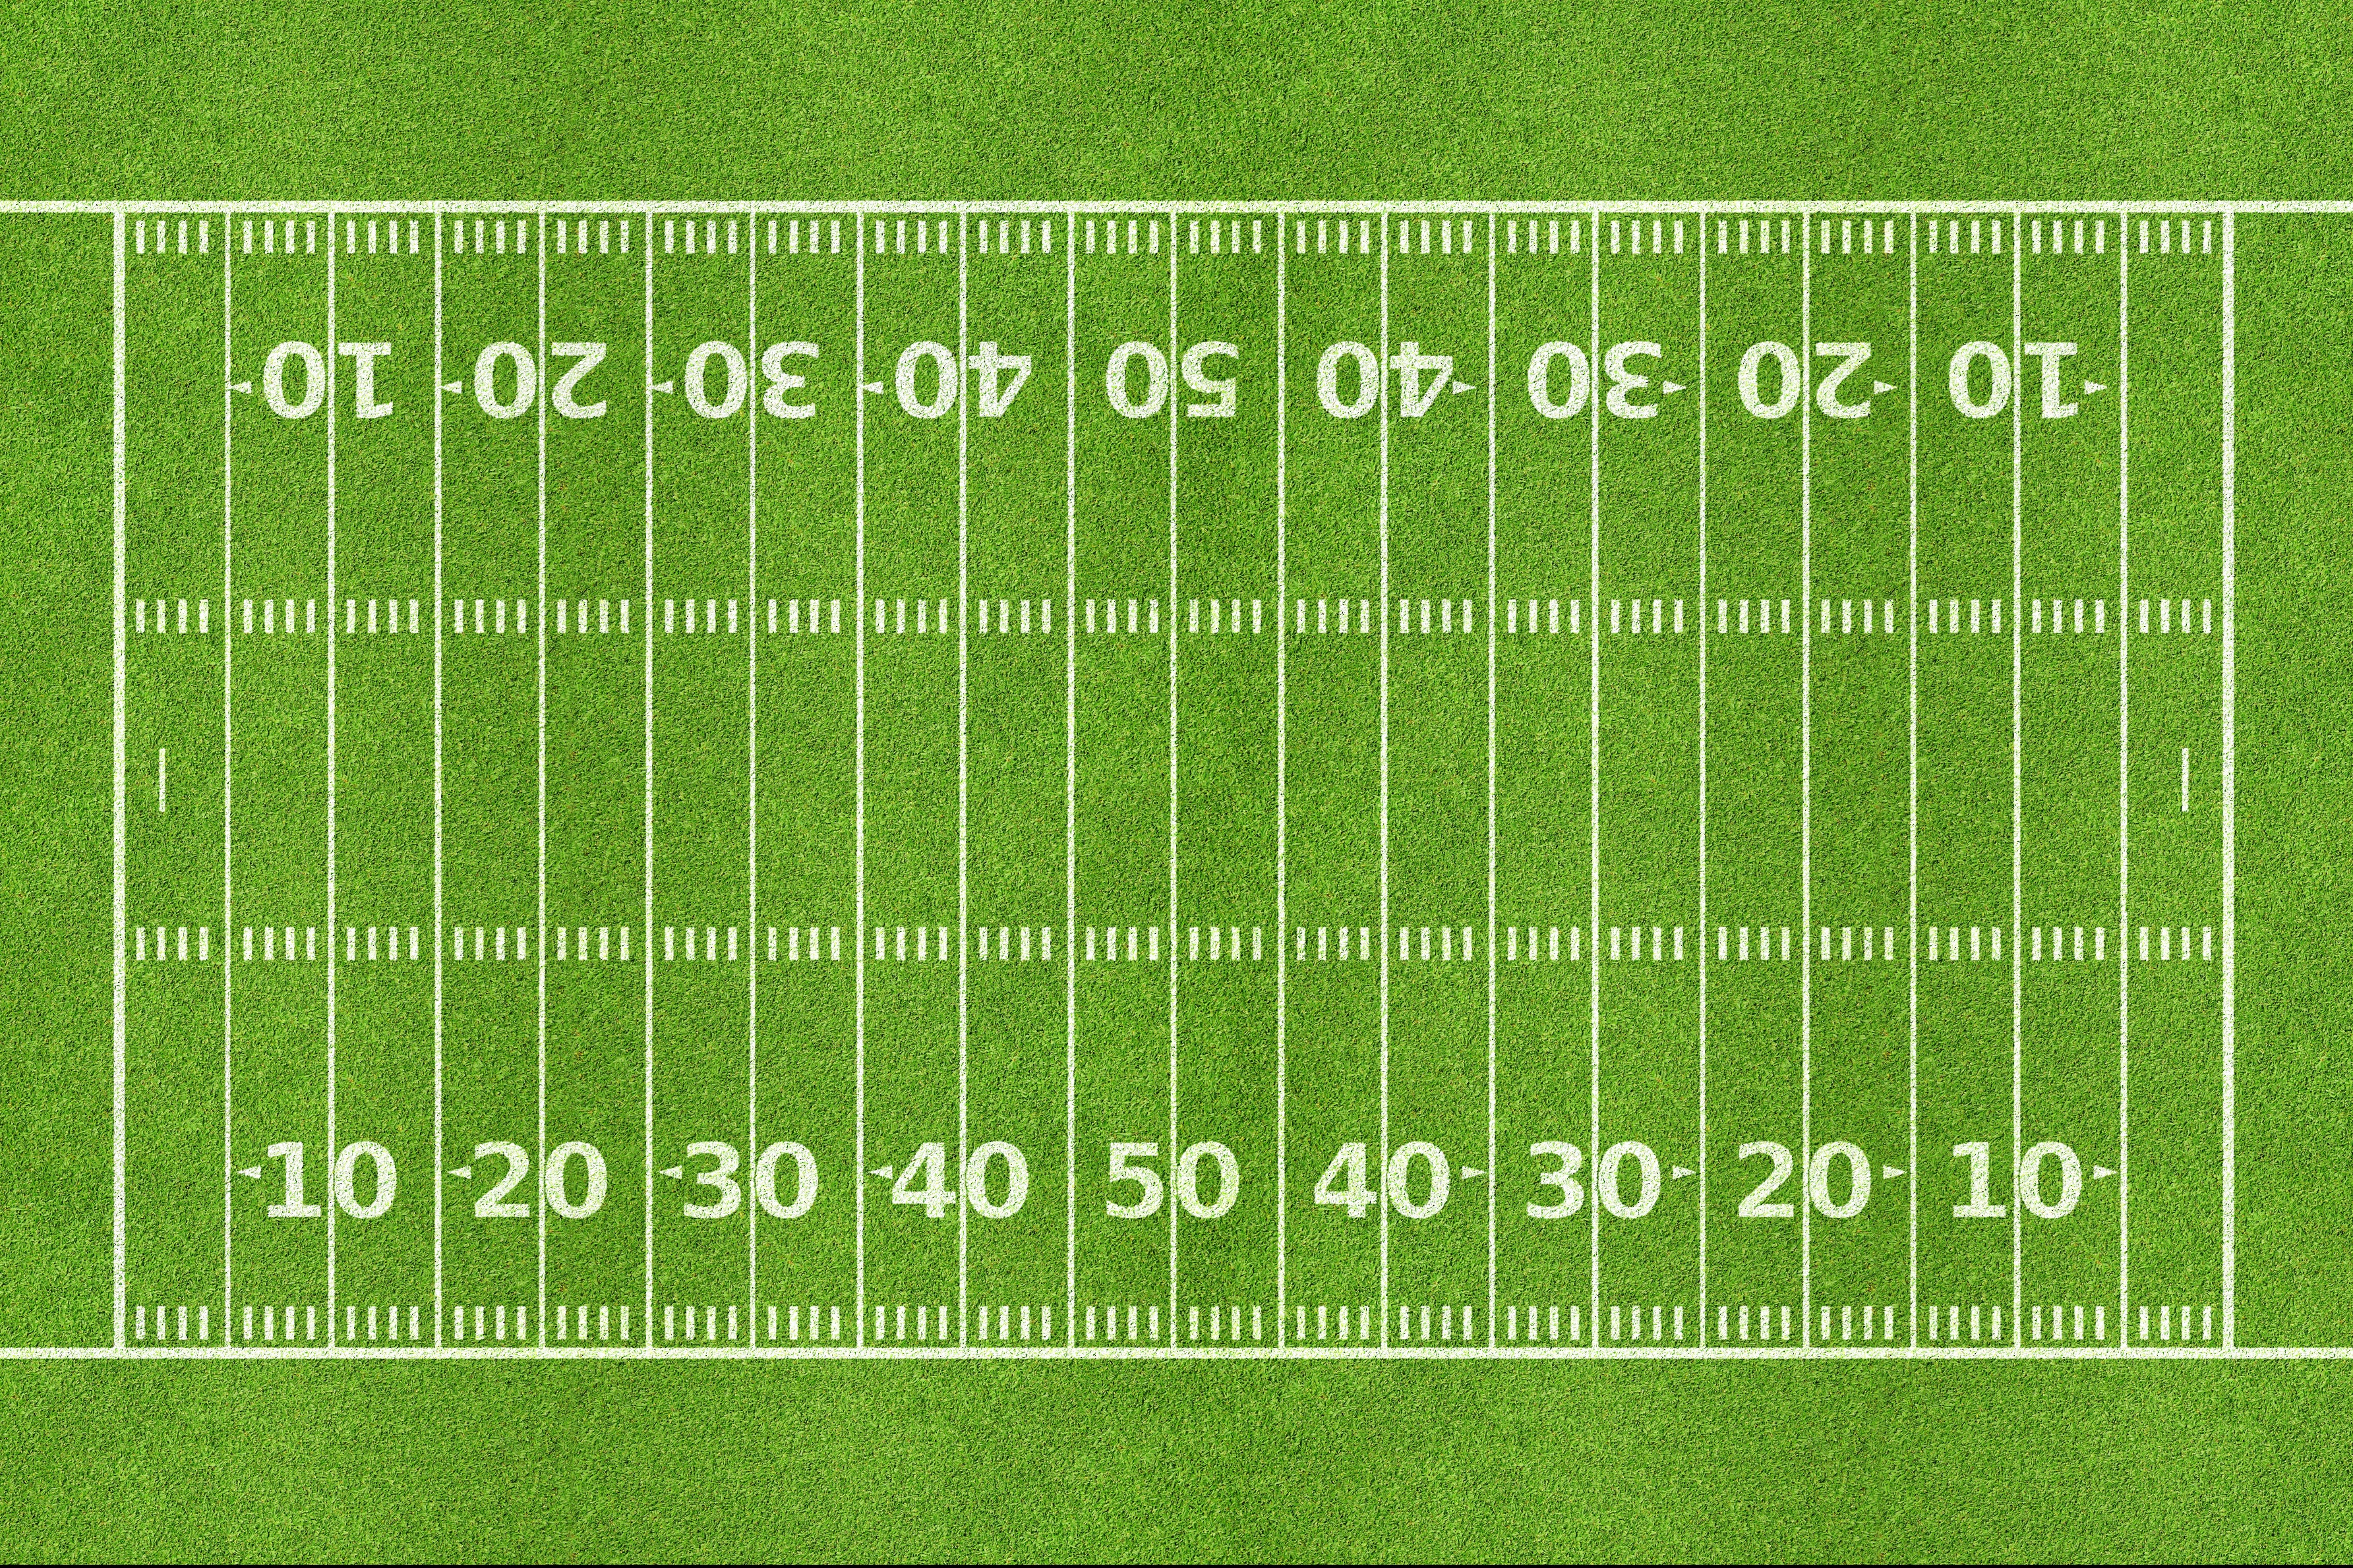 After Years Of Paralysis A Man Walks The Length Of A Football Field Scientific American